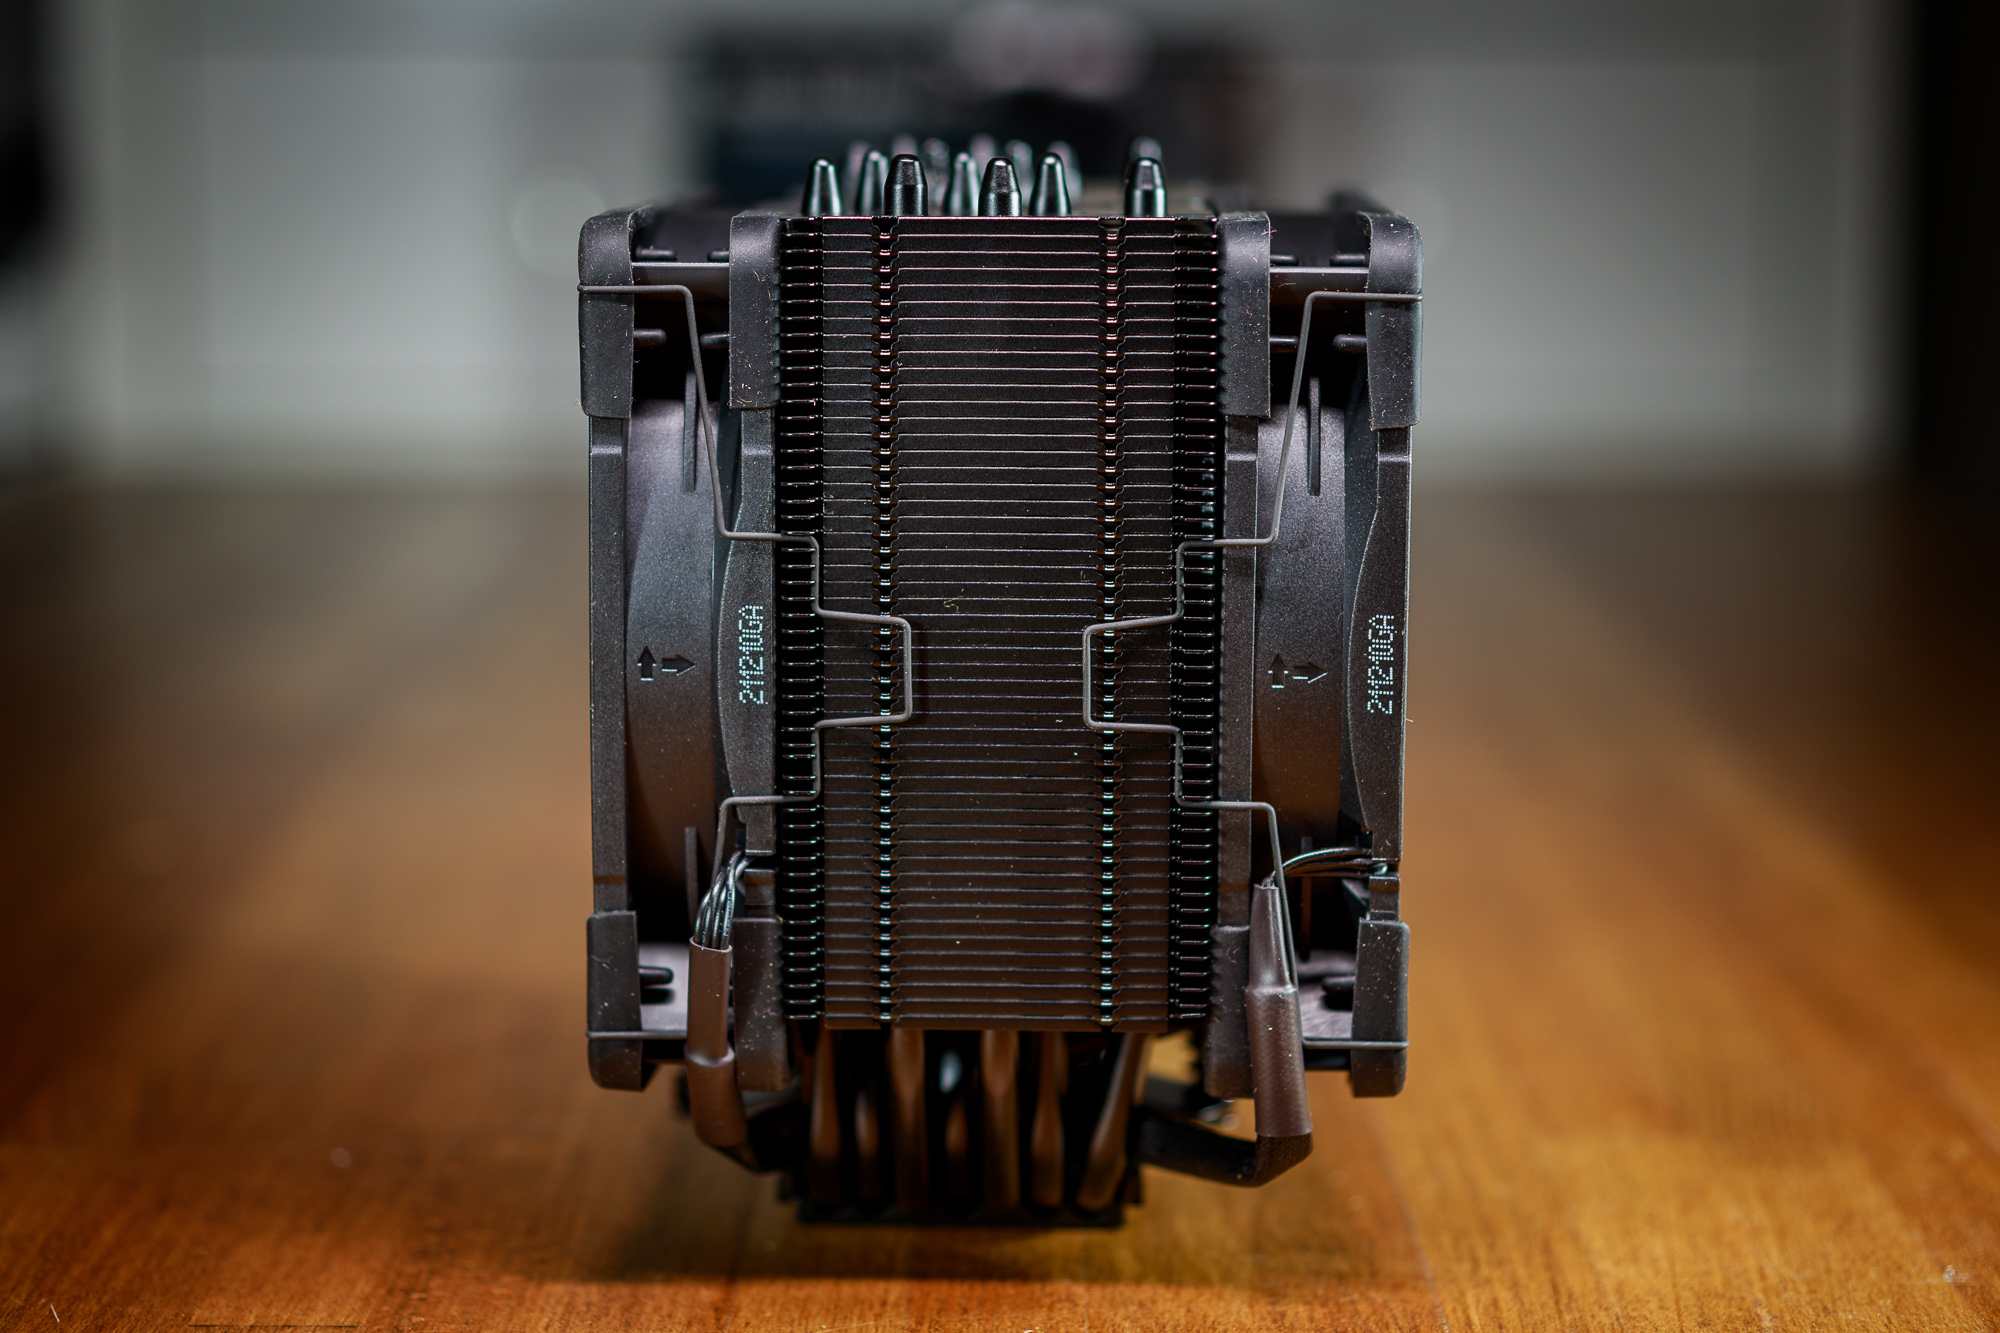 NH-U12A chromax.black 120mm CPU Cooler with two quiet NF-A12x25 fans